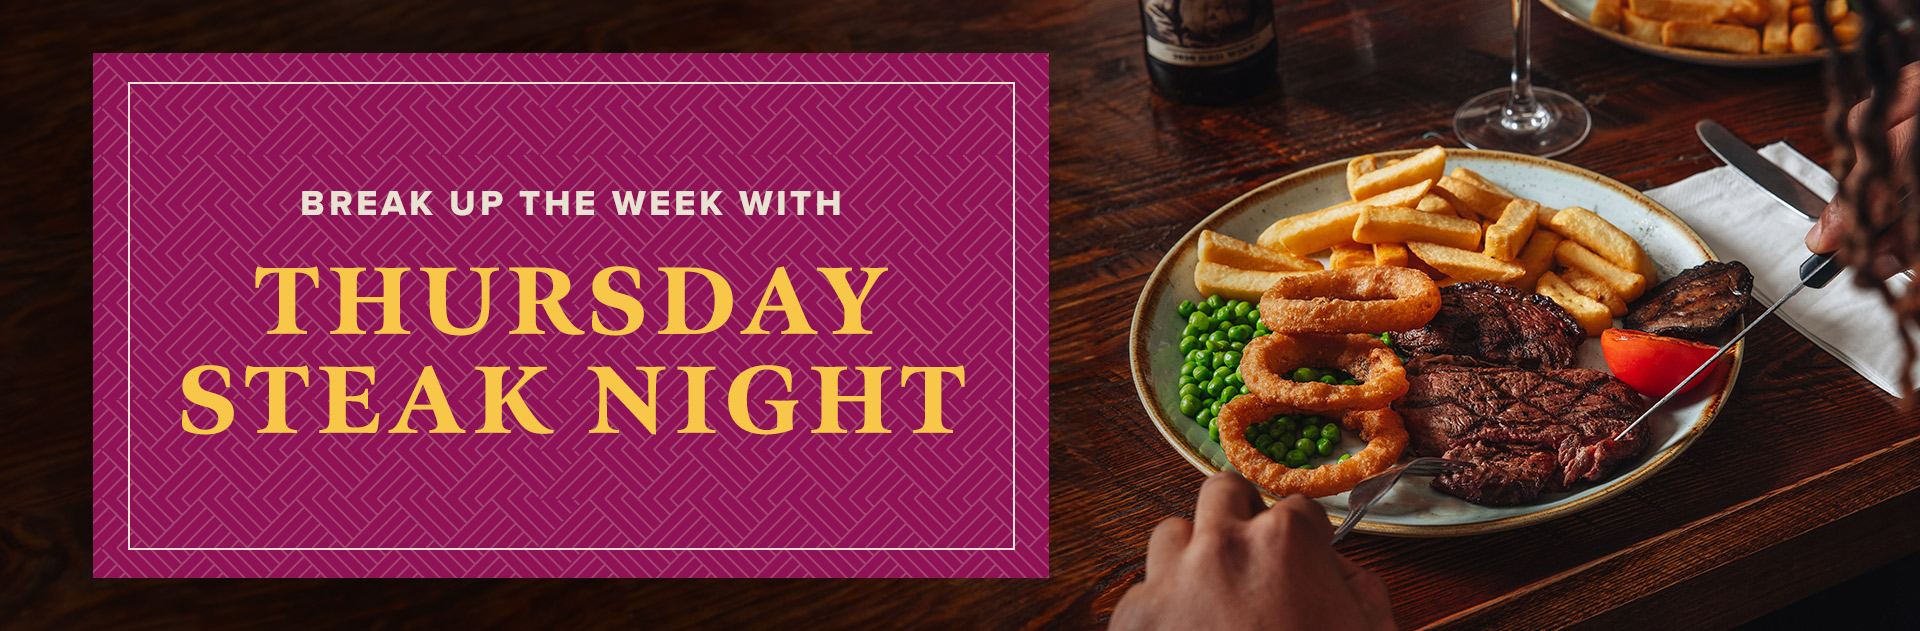 Thursday Steak Night at Red Lion, Walsgrave